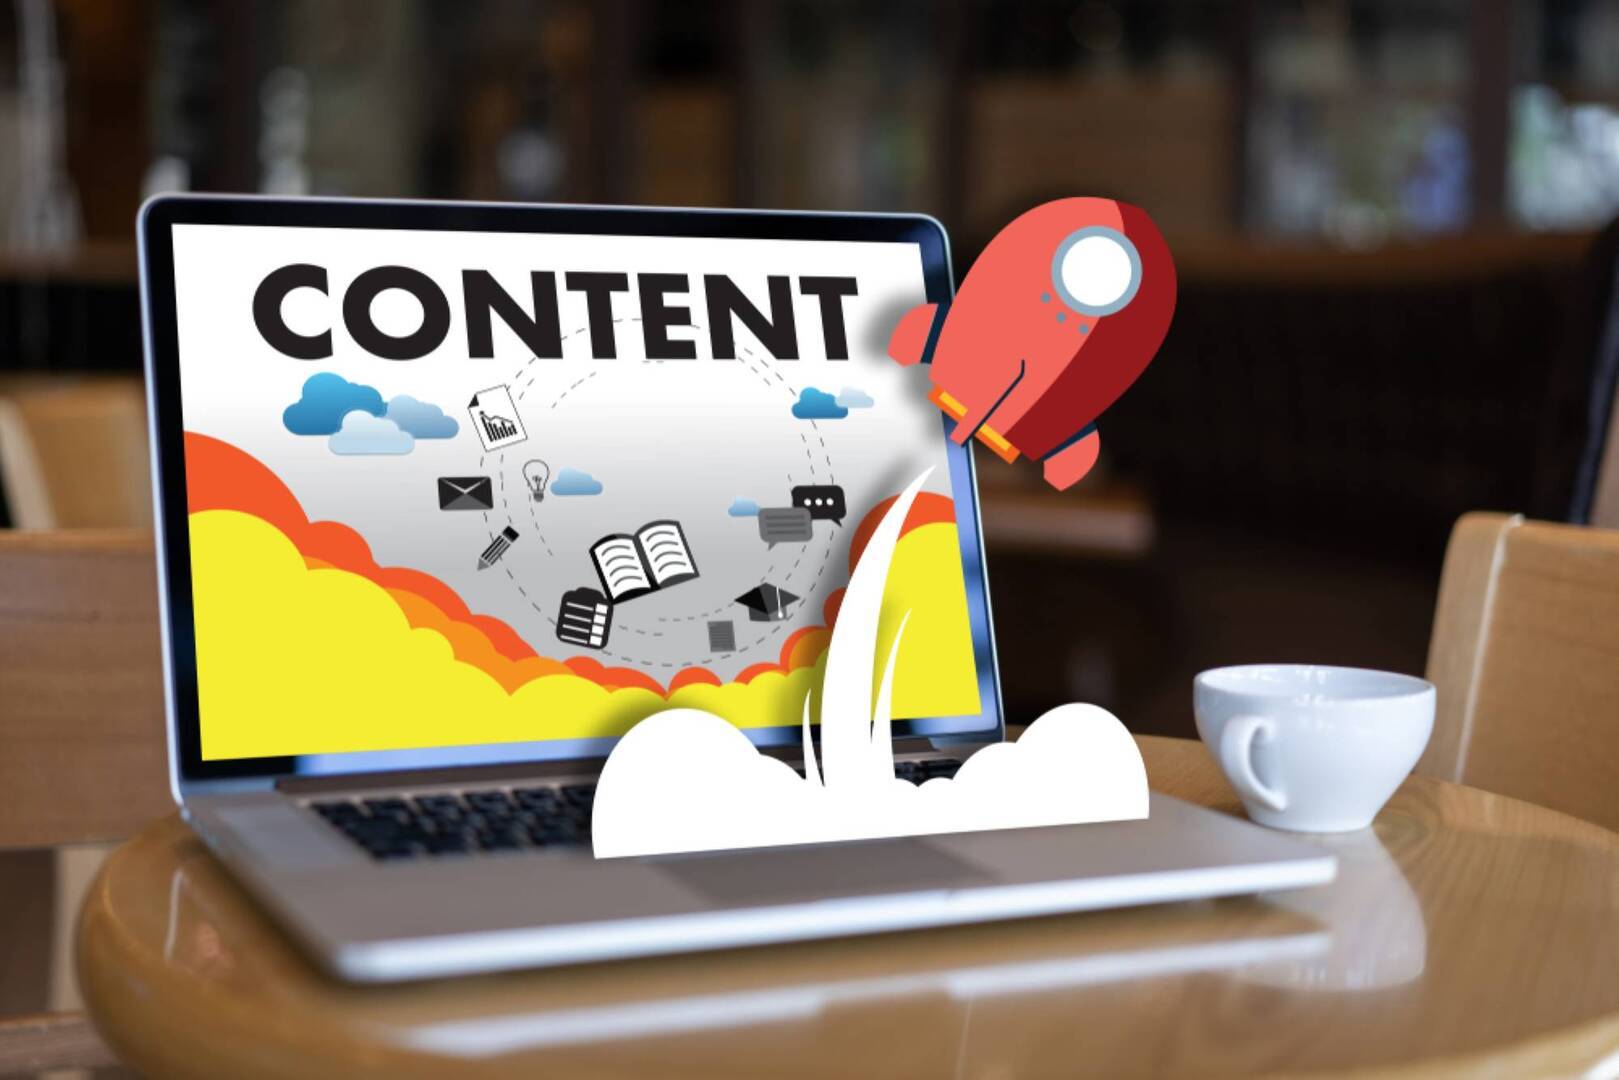 Does b2b business need content strategy?